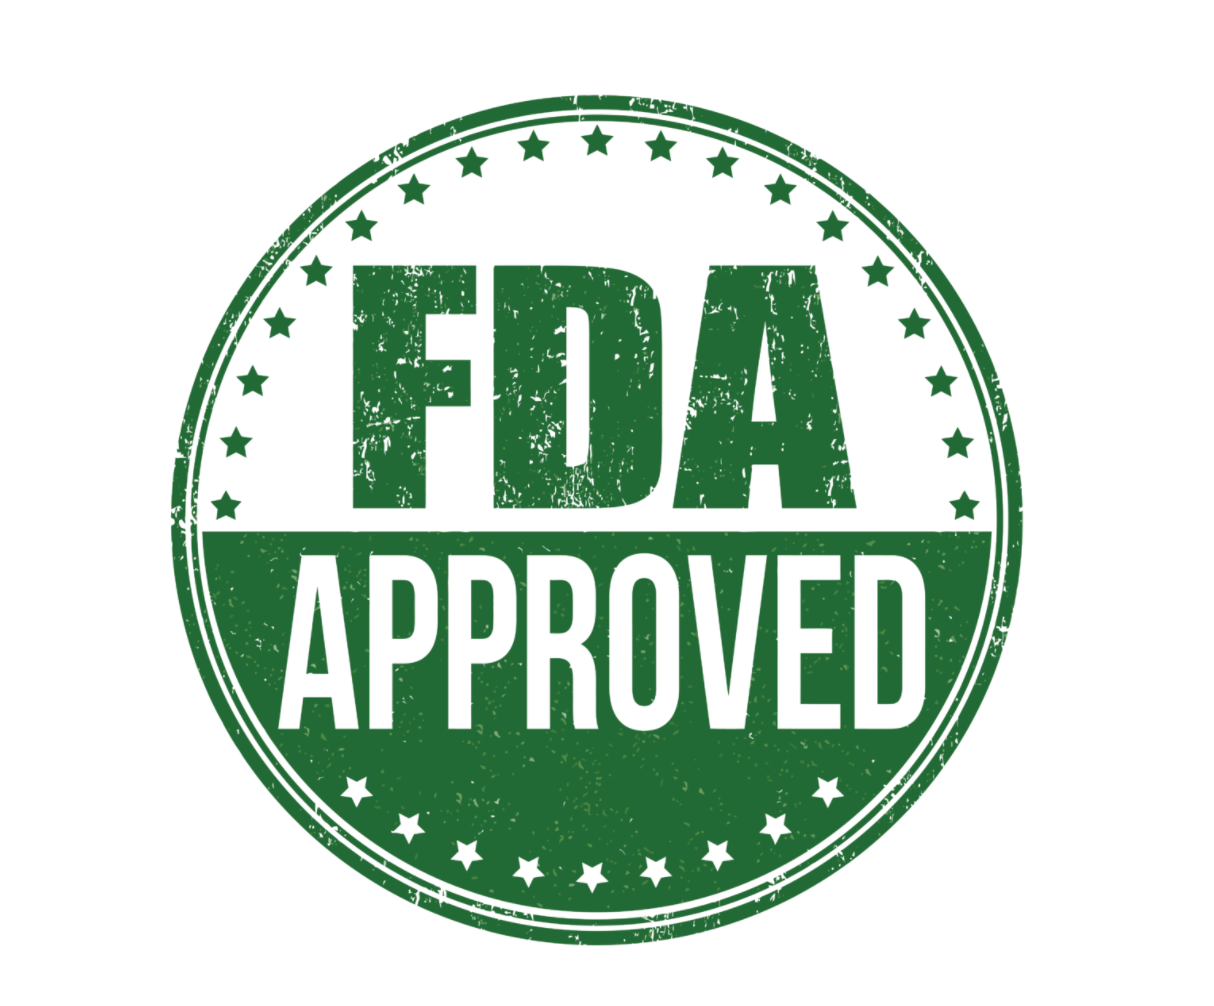 FDA Approves Trastuzumab Deruxtecan for Certain Patients With HER2-Positive Metastatic Breast Cancer 